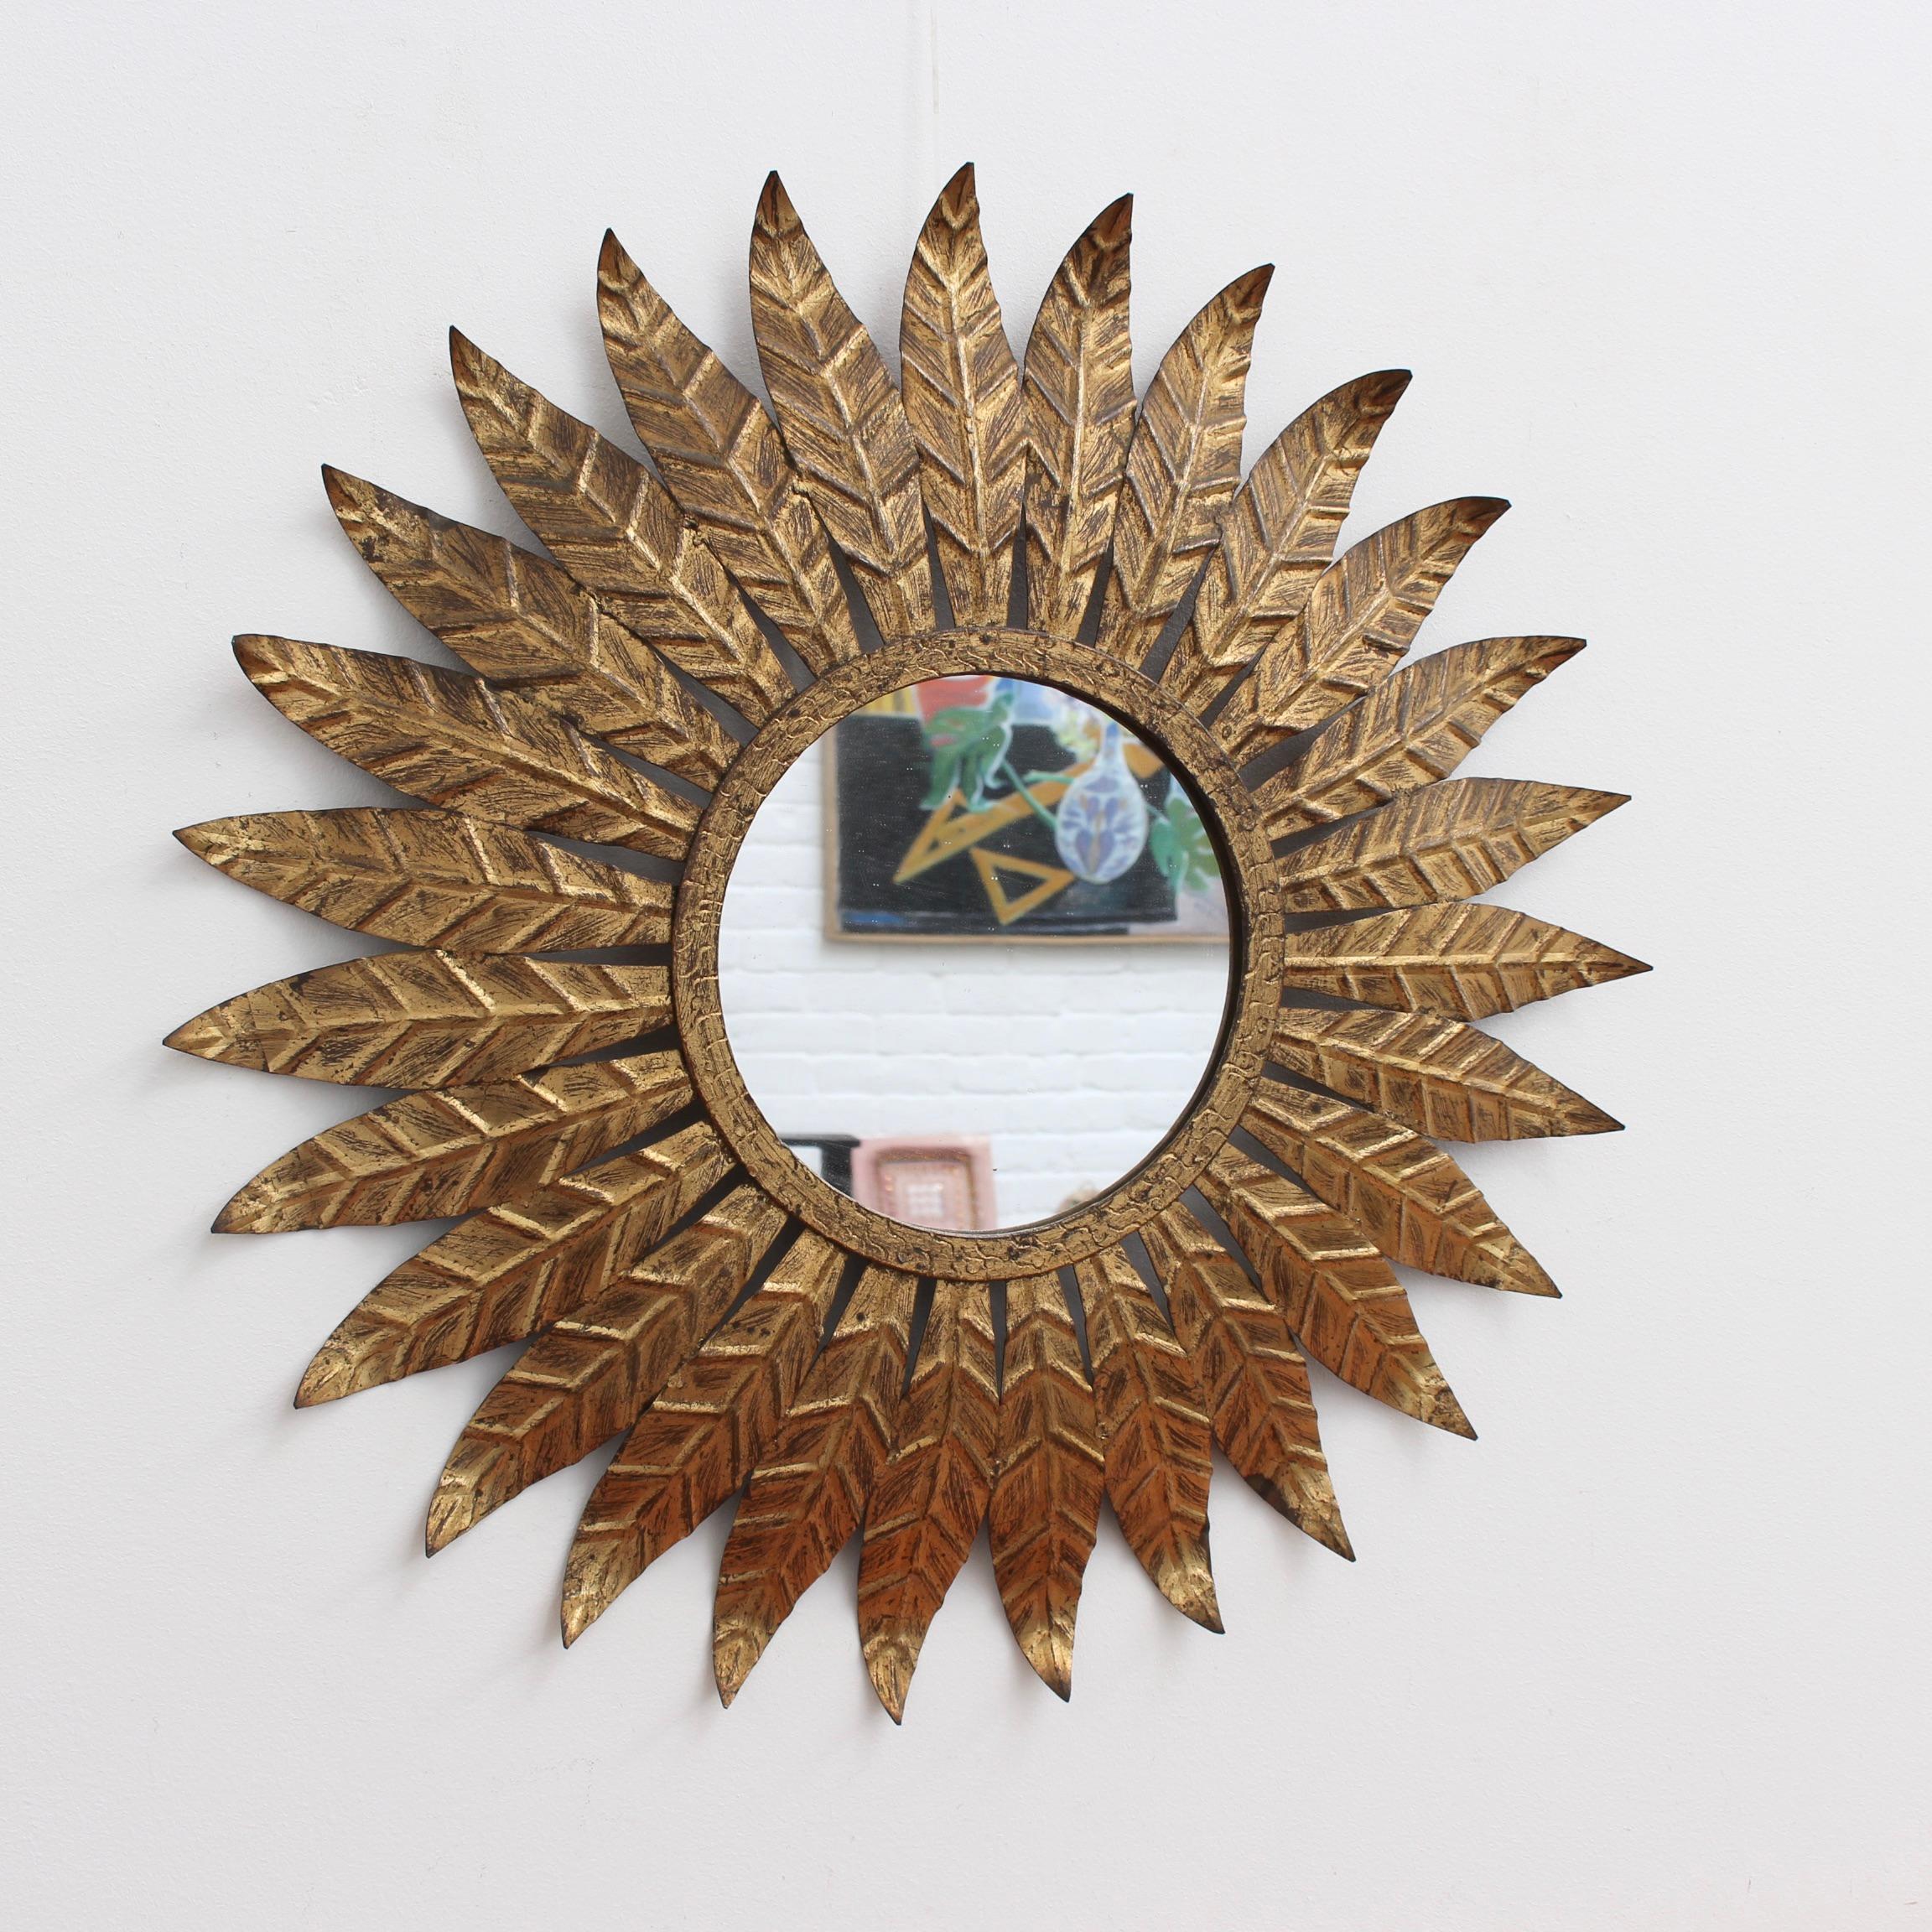 Spanish gilt metal sunburst mirror (circa 1960s) with leaf motif rays emanating from the glass border. In fair vintage condition commensurate with age and use. Some authentic age spots and characterful markings appear on gilt surface adding